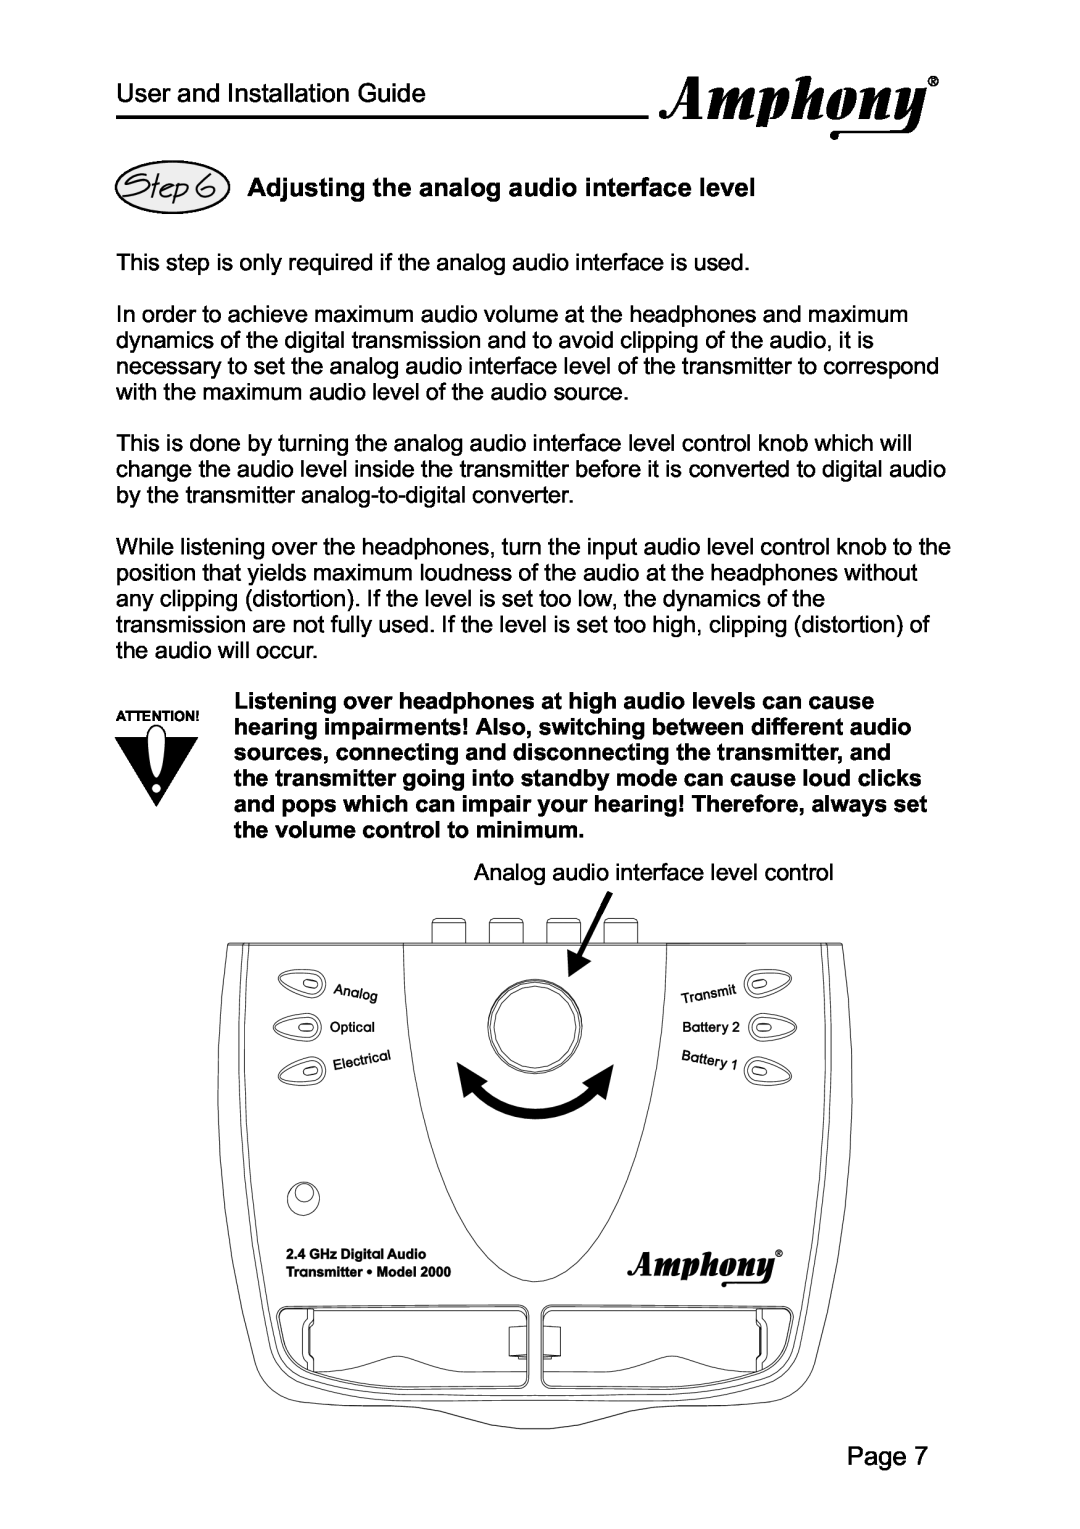 Amphony 2000 manual Adjusting the analog audio interface level, User and Installation Guide, Page 